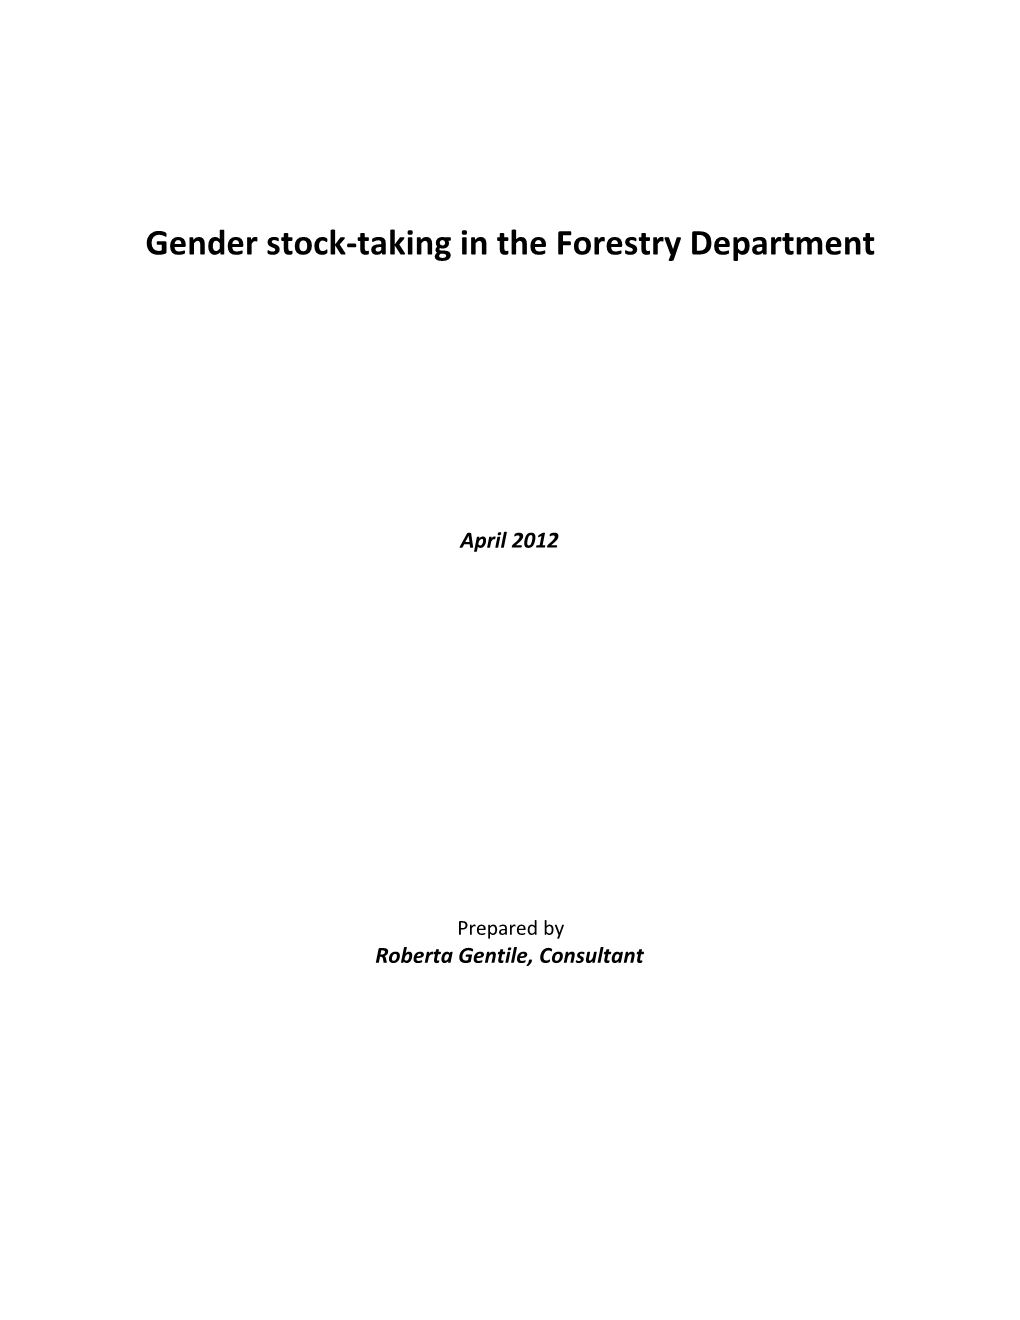 Gender Stock-Taking in the Forestry Department